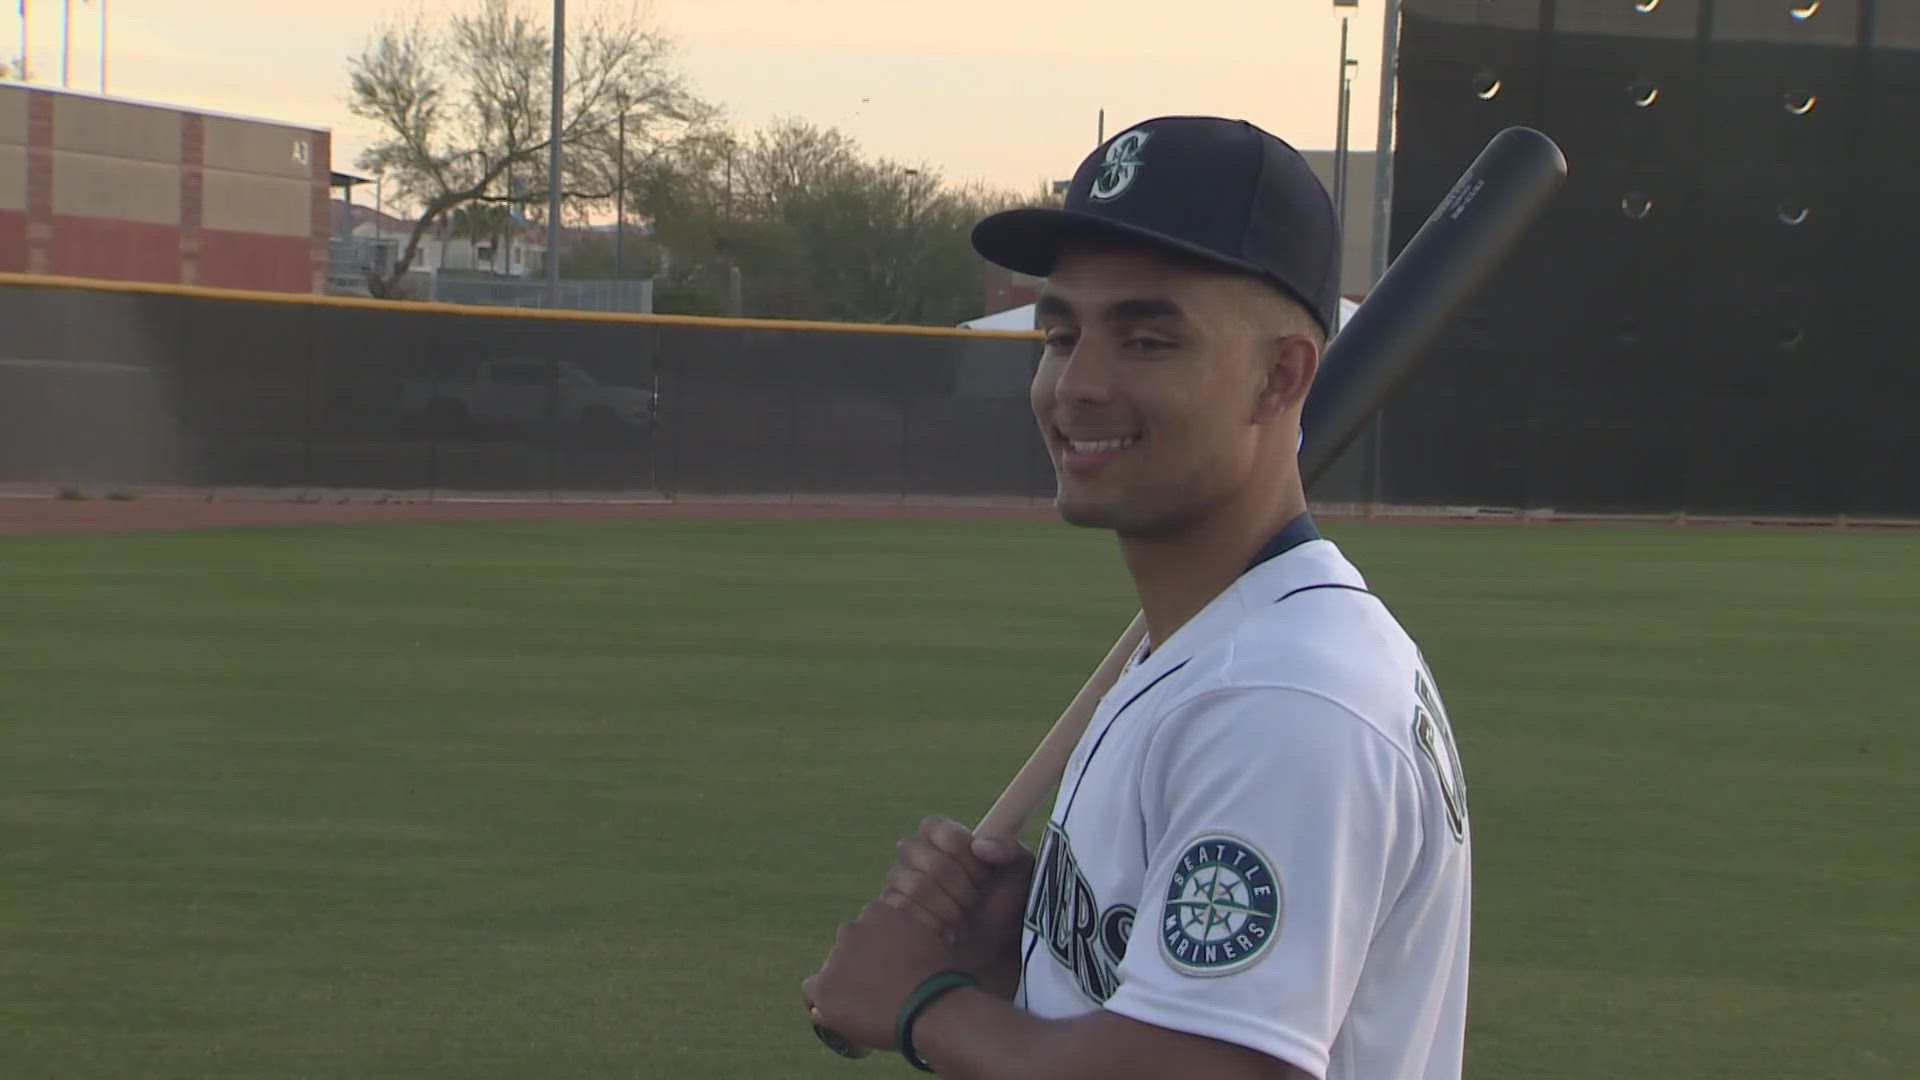 The Mariners' No. 1 prospect sits down with Chris Egan to talk about his first big-league spring training and competing in the World Baseball Classic.